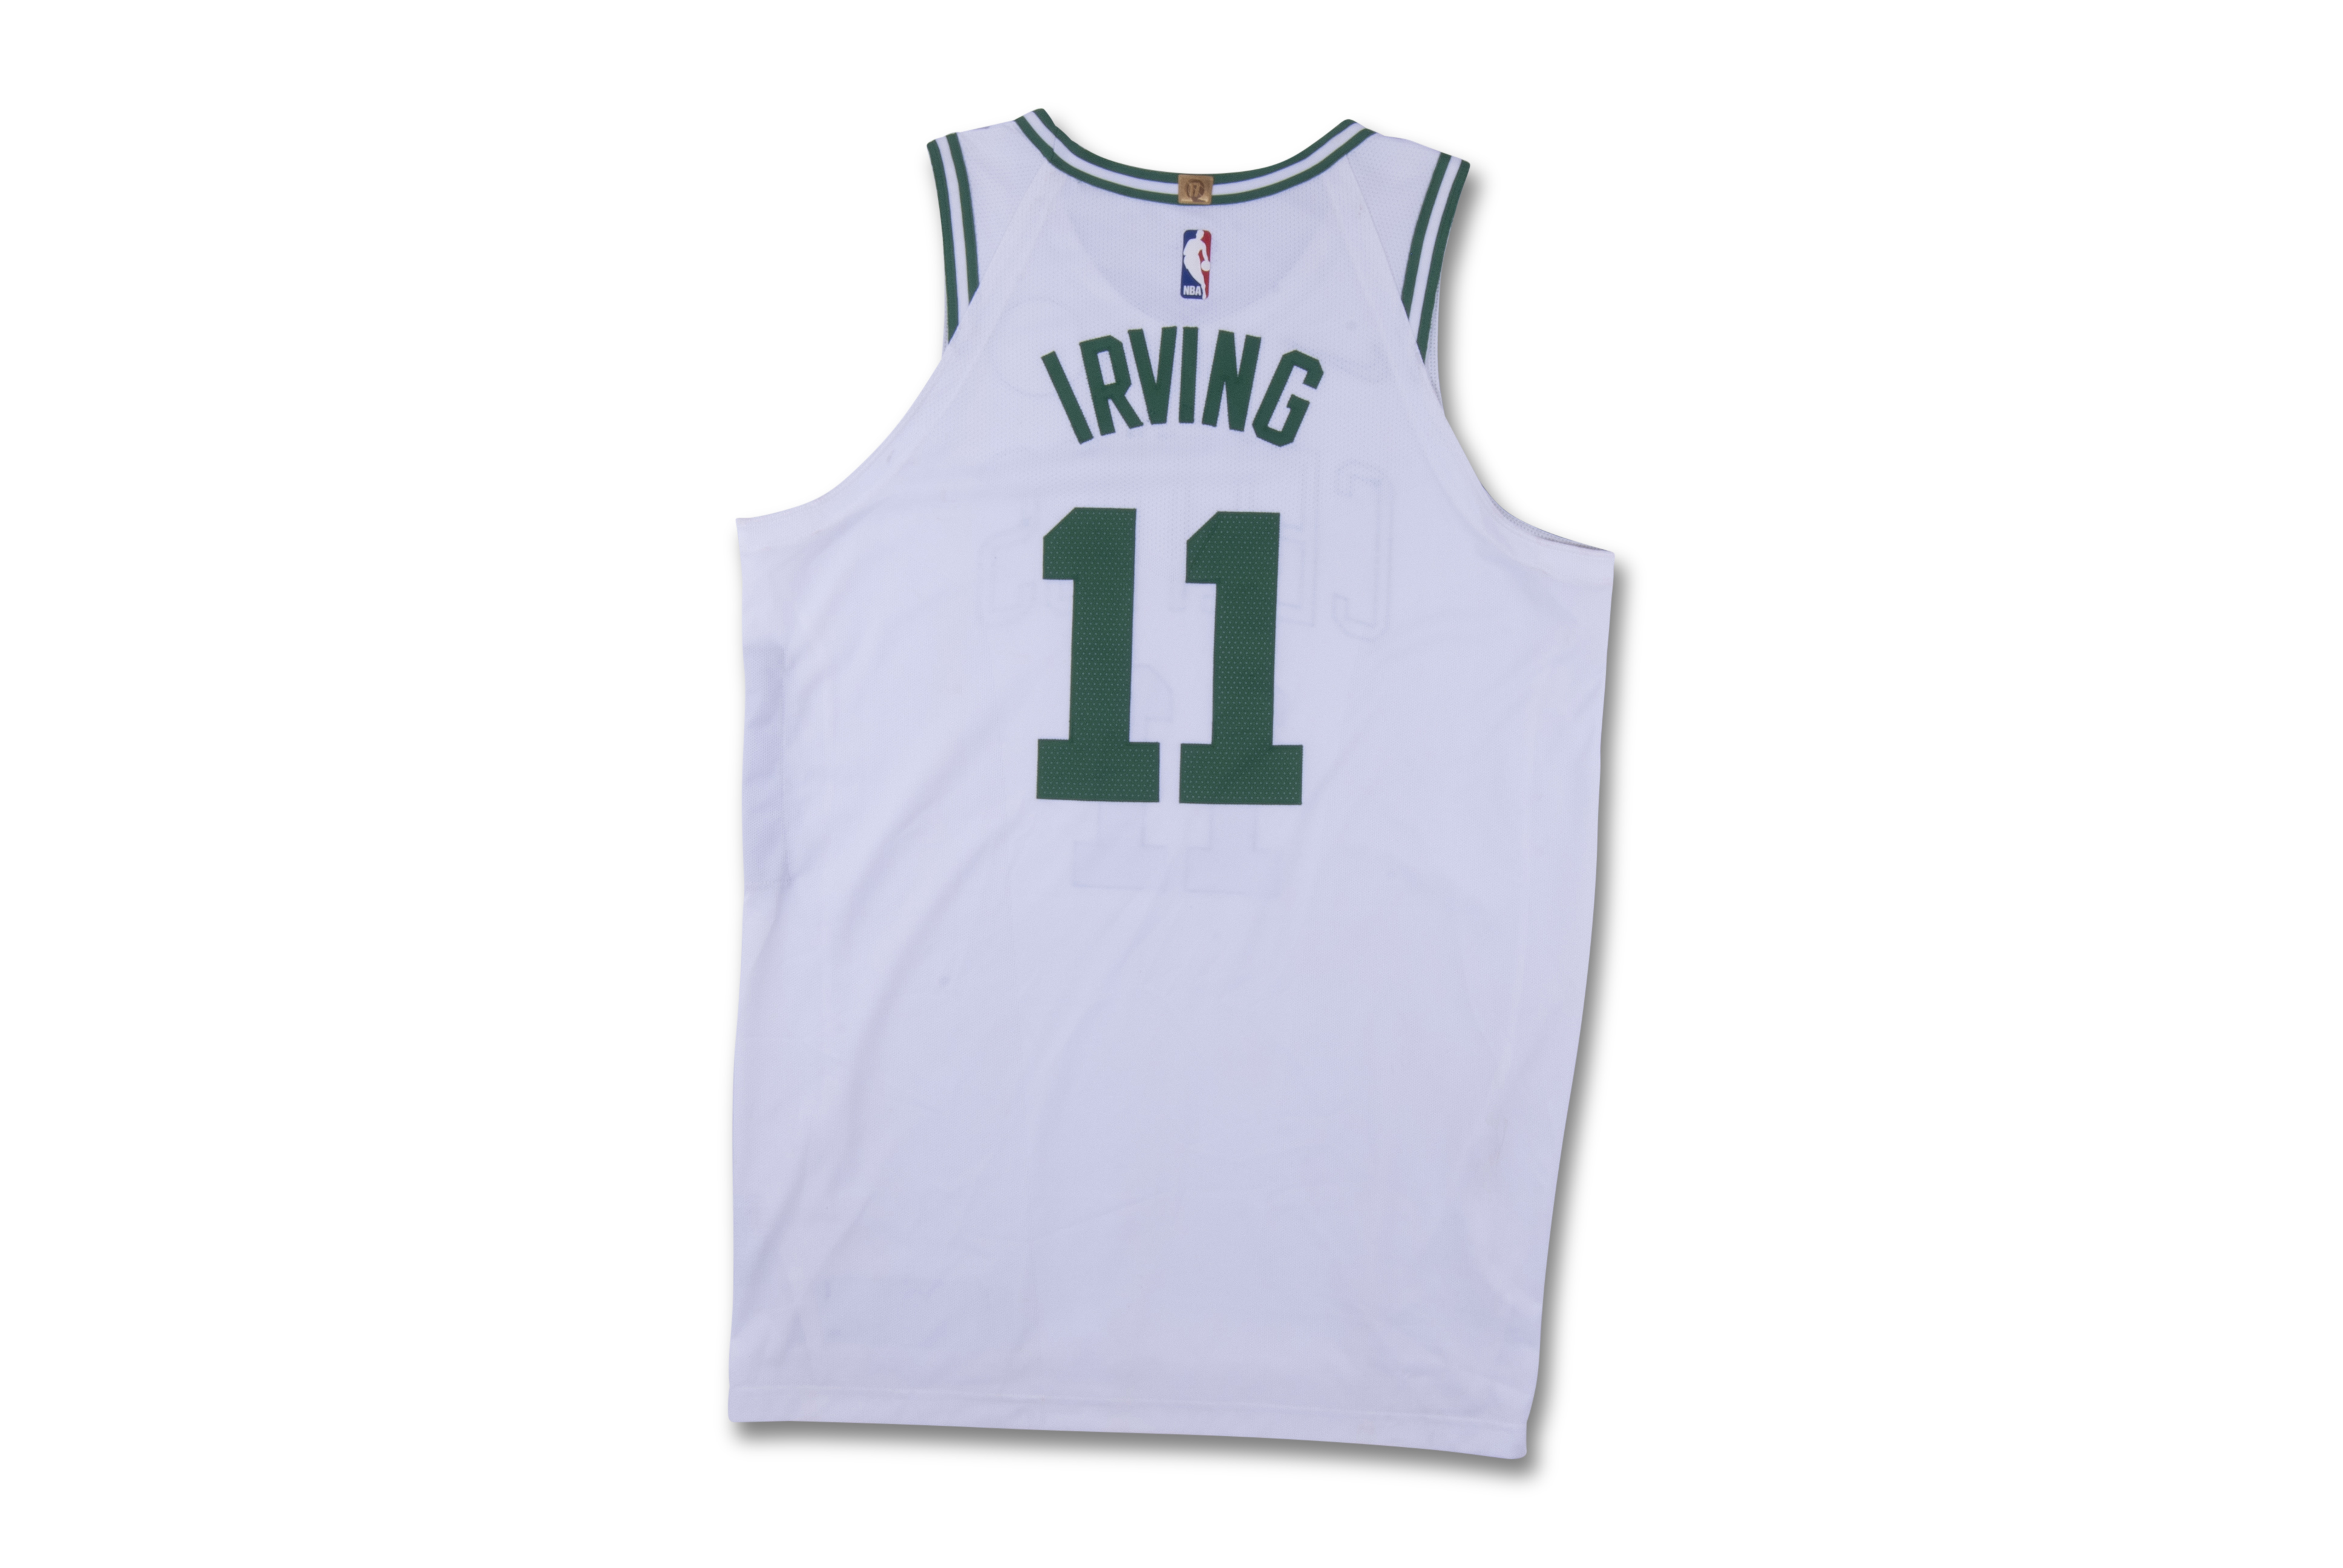  Celtics Kyrie Irving 2019 Game Used Green Nike Jersey